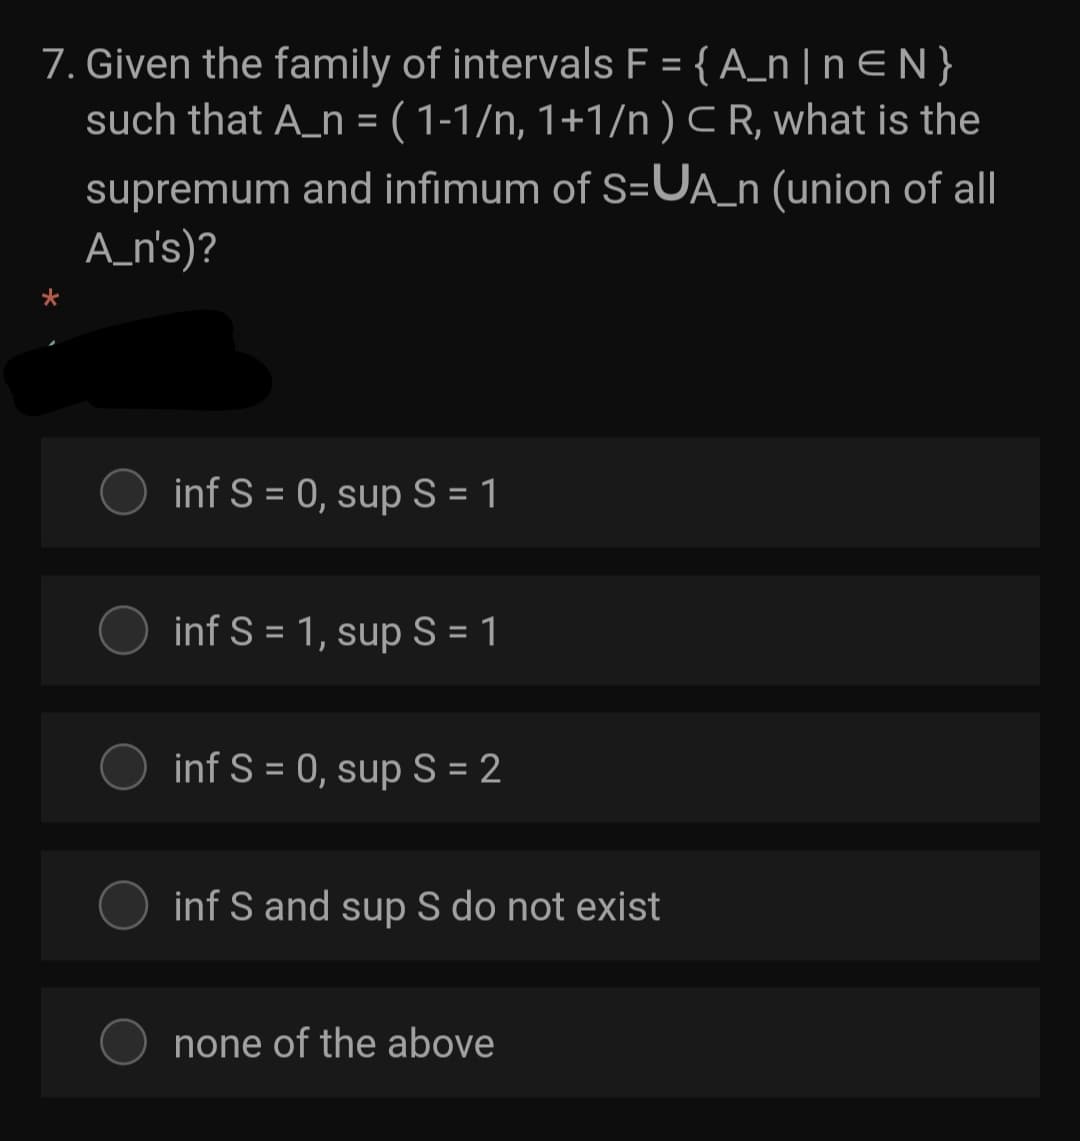 7. Given the family of intervals F = {A_n | n E N}
such that A_n = ( 1-1/n, 1+1/n ) CR, what is the
supremum and infimum of S=UA_n (union of all
A_n's)?
inf S = 0, sup S = 1
inf S = 1, sup S = 1
inf S = 0, sup S = 2
inf S and sup S do not exist
none of the above
